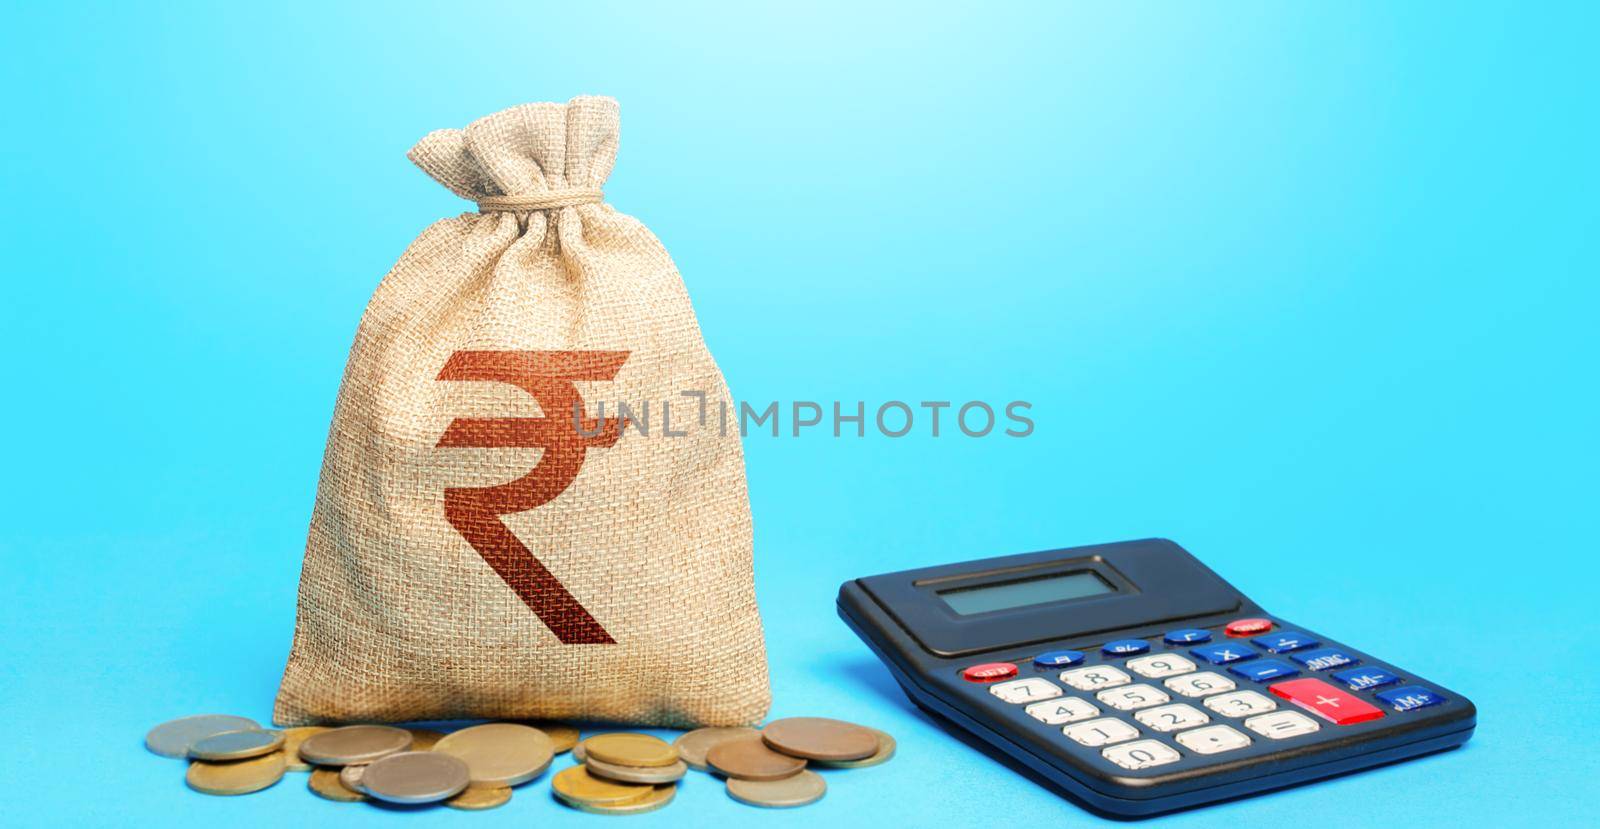 Indian rupee money bag and calculator. Accounting concept. Analysis of loan selection. Income and expenses. Calculation of damage and insurance payments. Summing up the financial results. Budgeting.